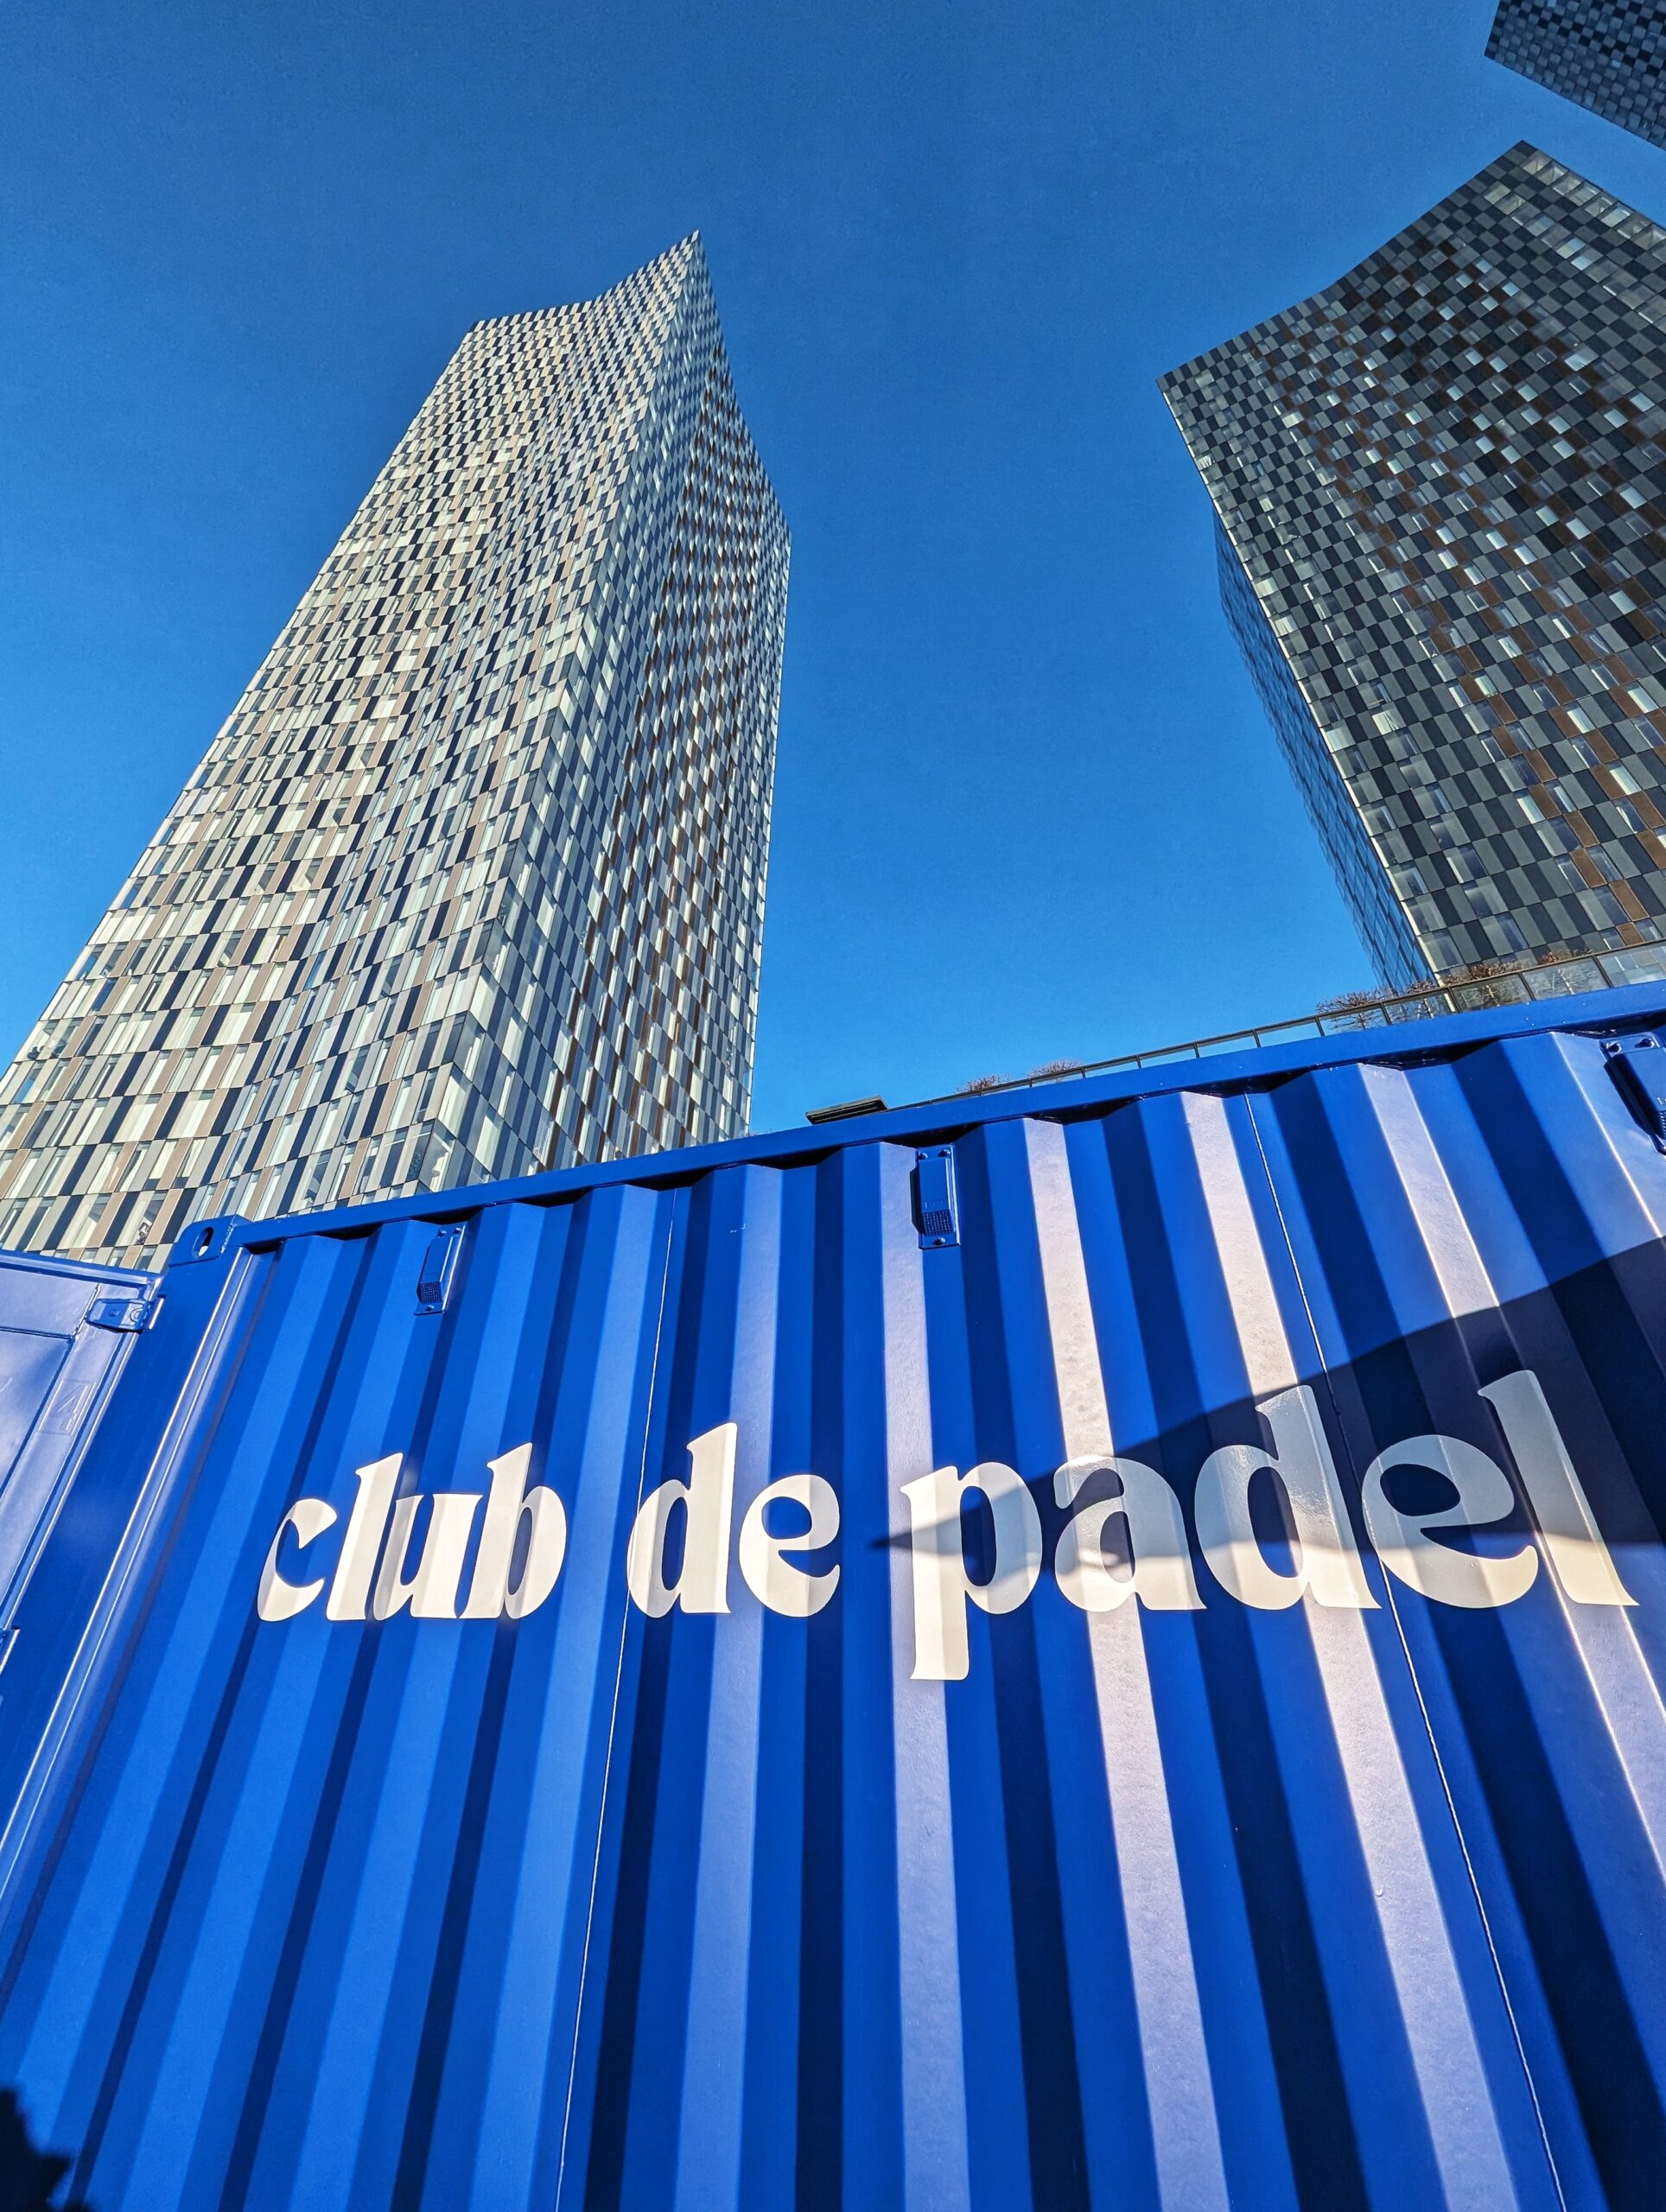 Club de Padel is at the foot of the Deansgate Square towers